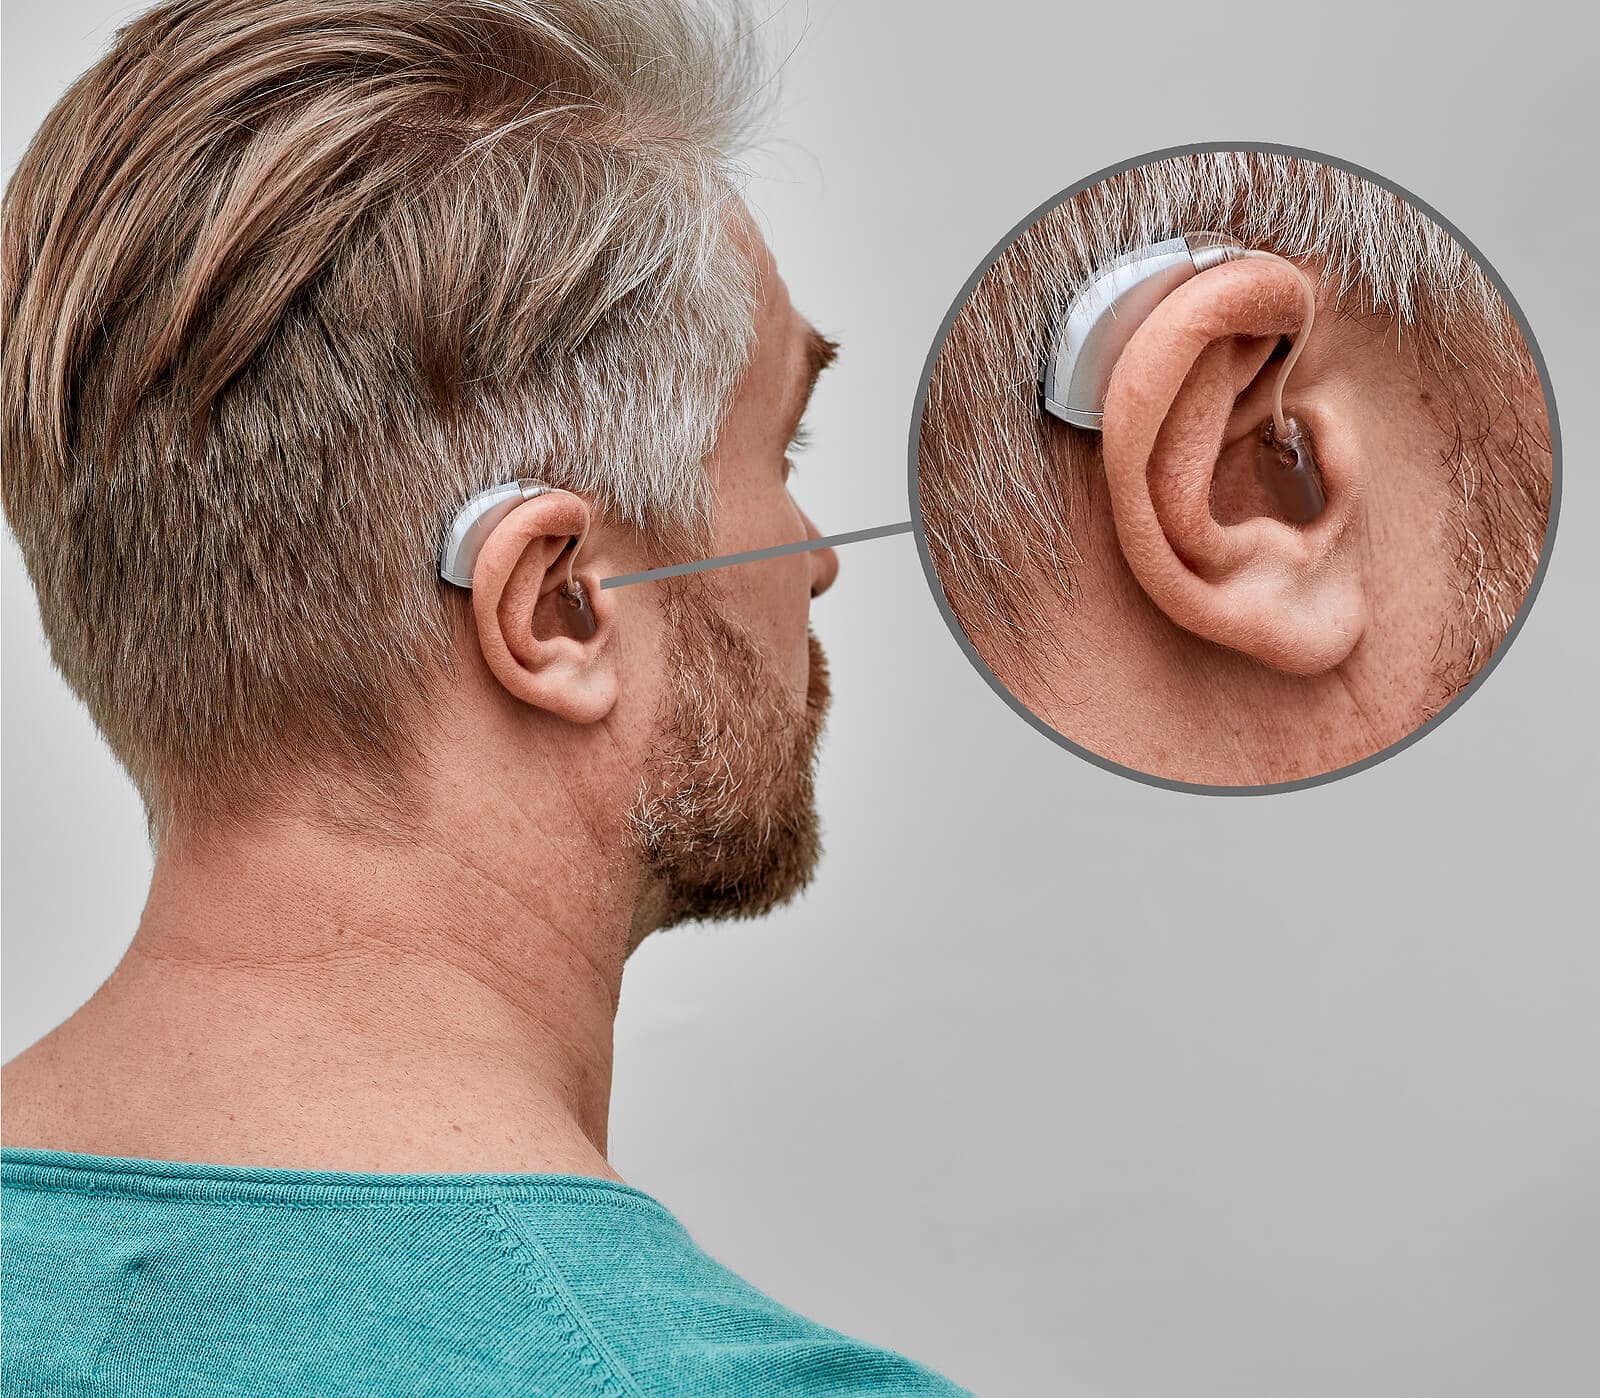 Featured image for “What You Should Know Before Buying Hearing Aids”